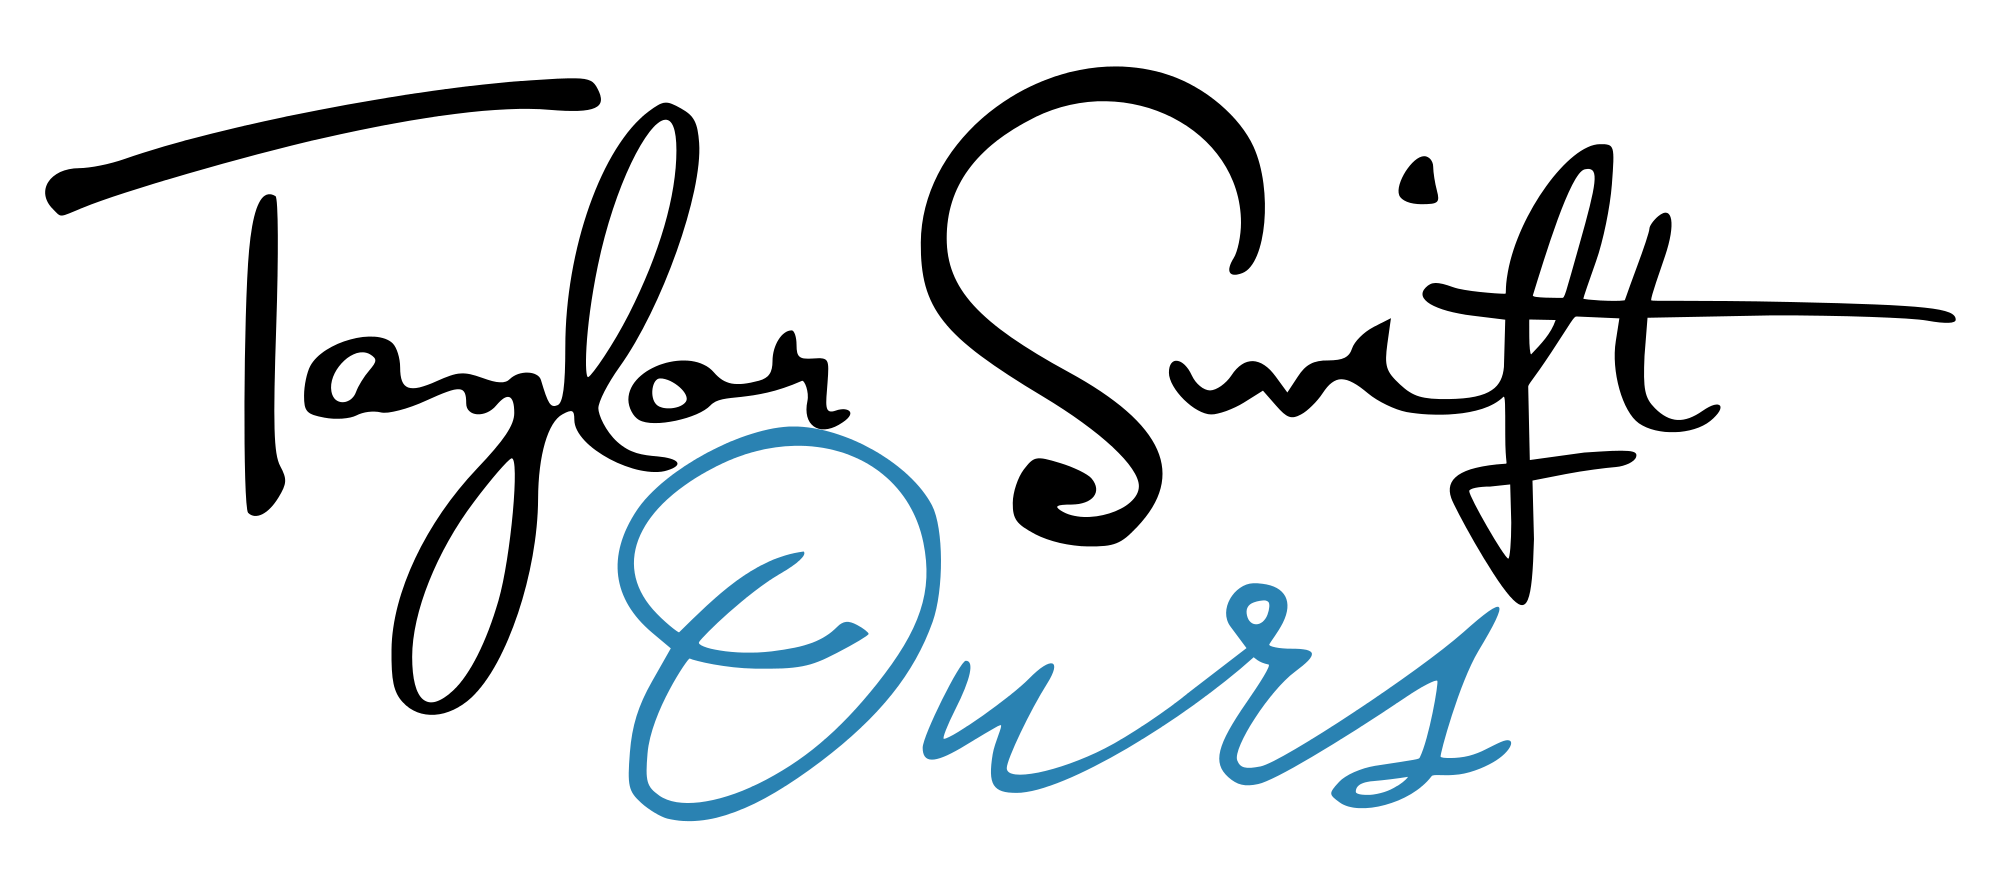 Taylor Swift Logo - File:Taylor Swift Ours logo.svg - Wikimedia Commons